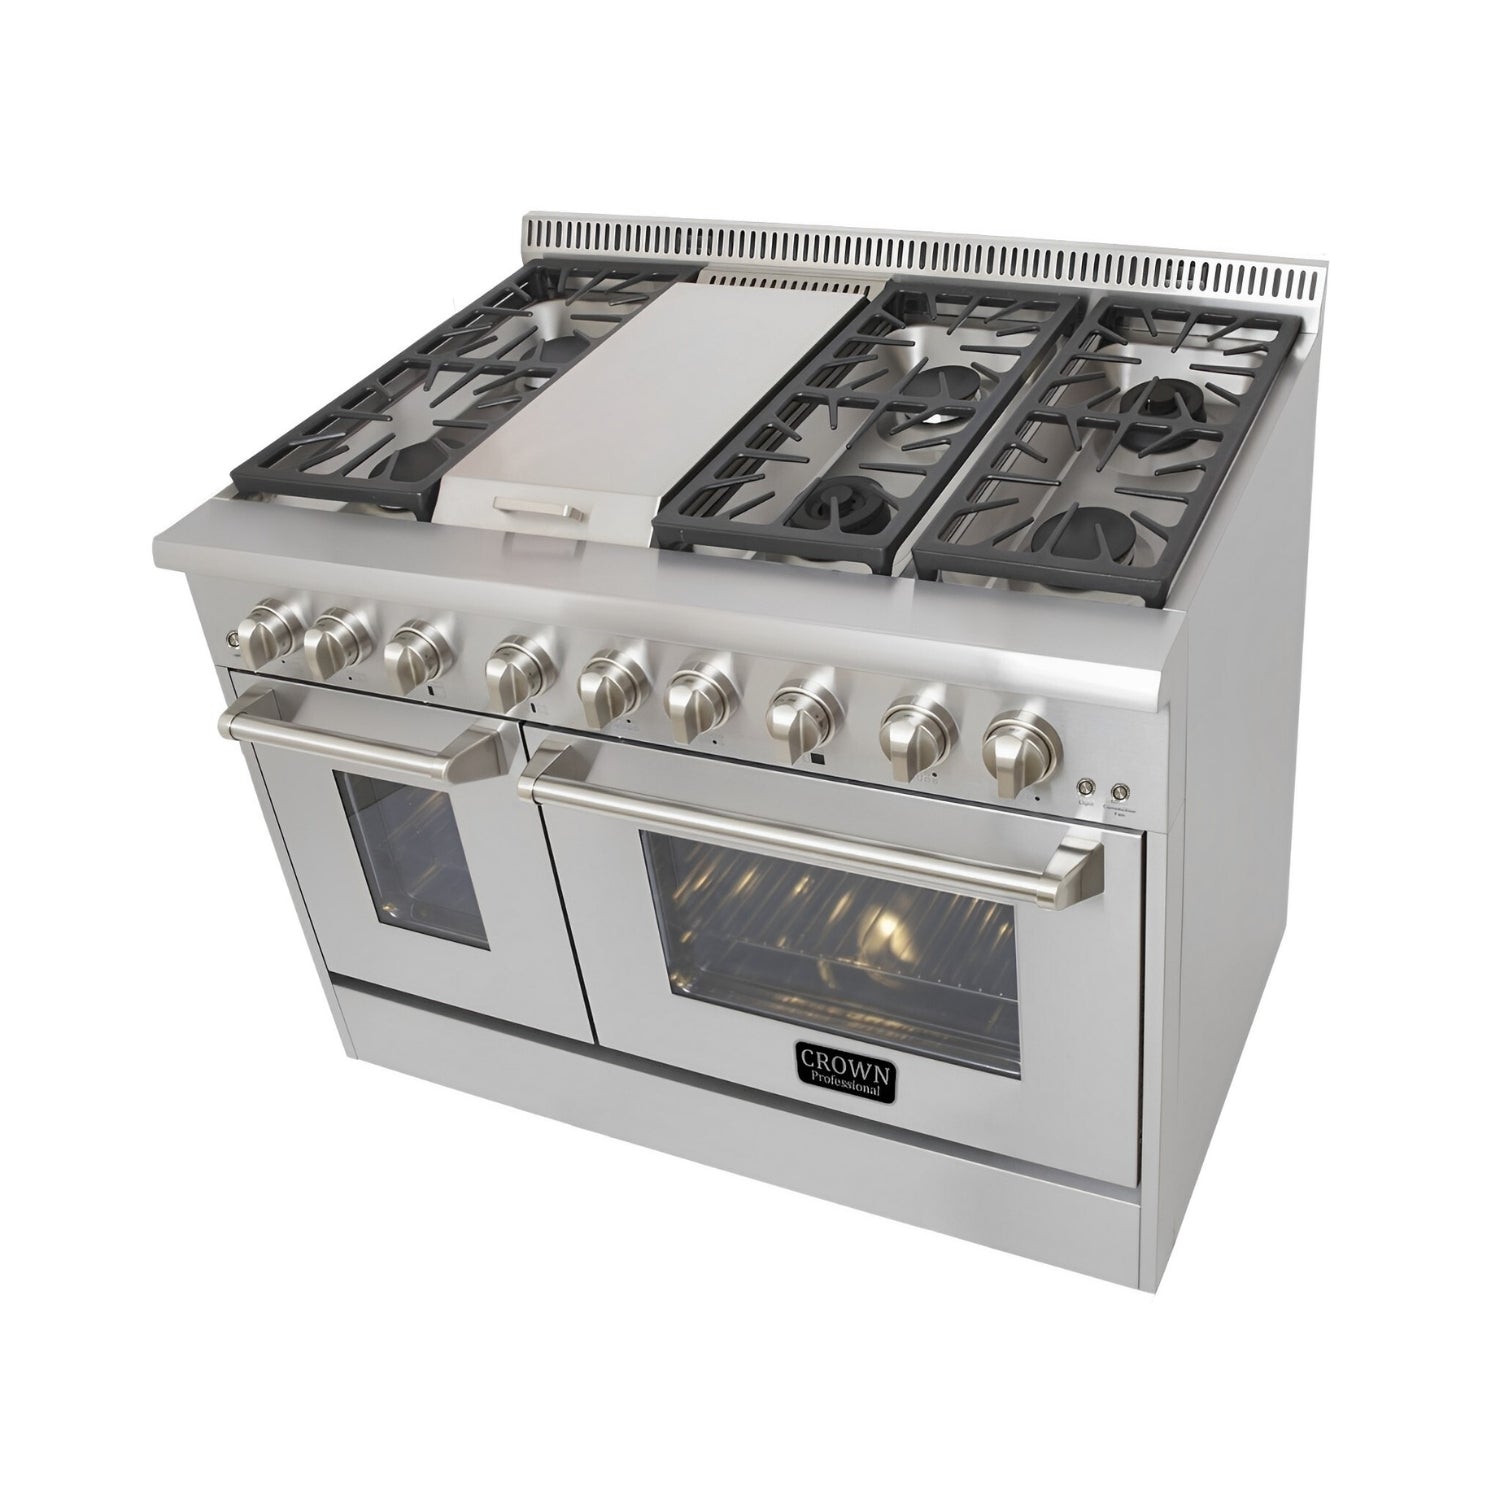 48" Crown Professional Stainless Steel Dual Fuel Double Gas Range ARD4801